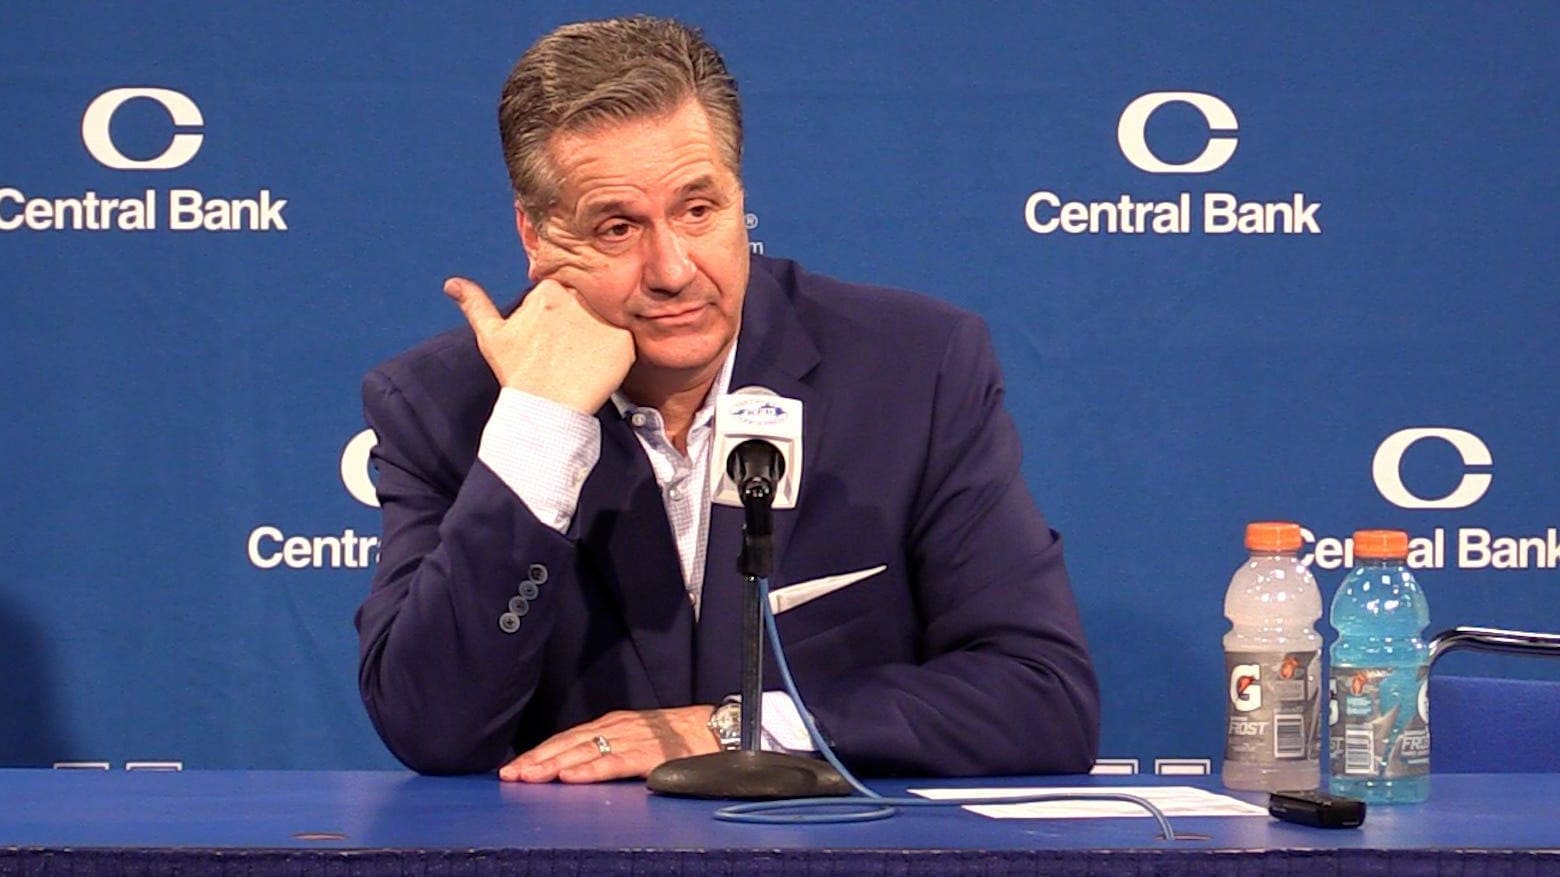 John Calipari looks dejected at a press conference after a loss to Florida.